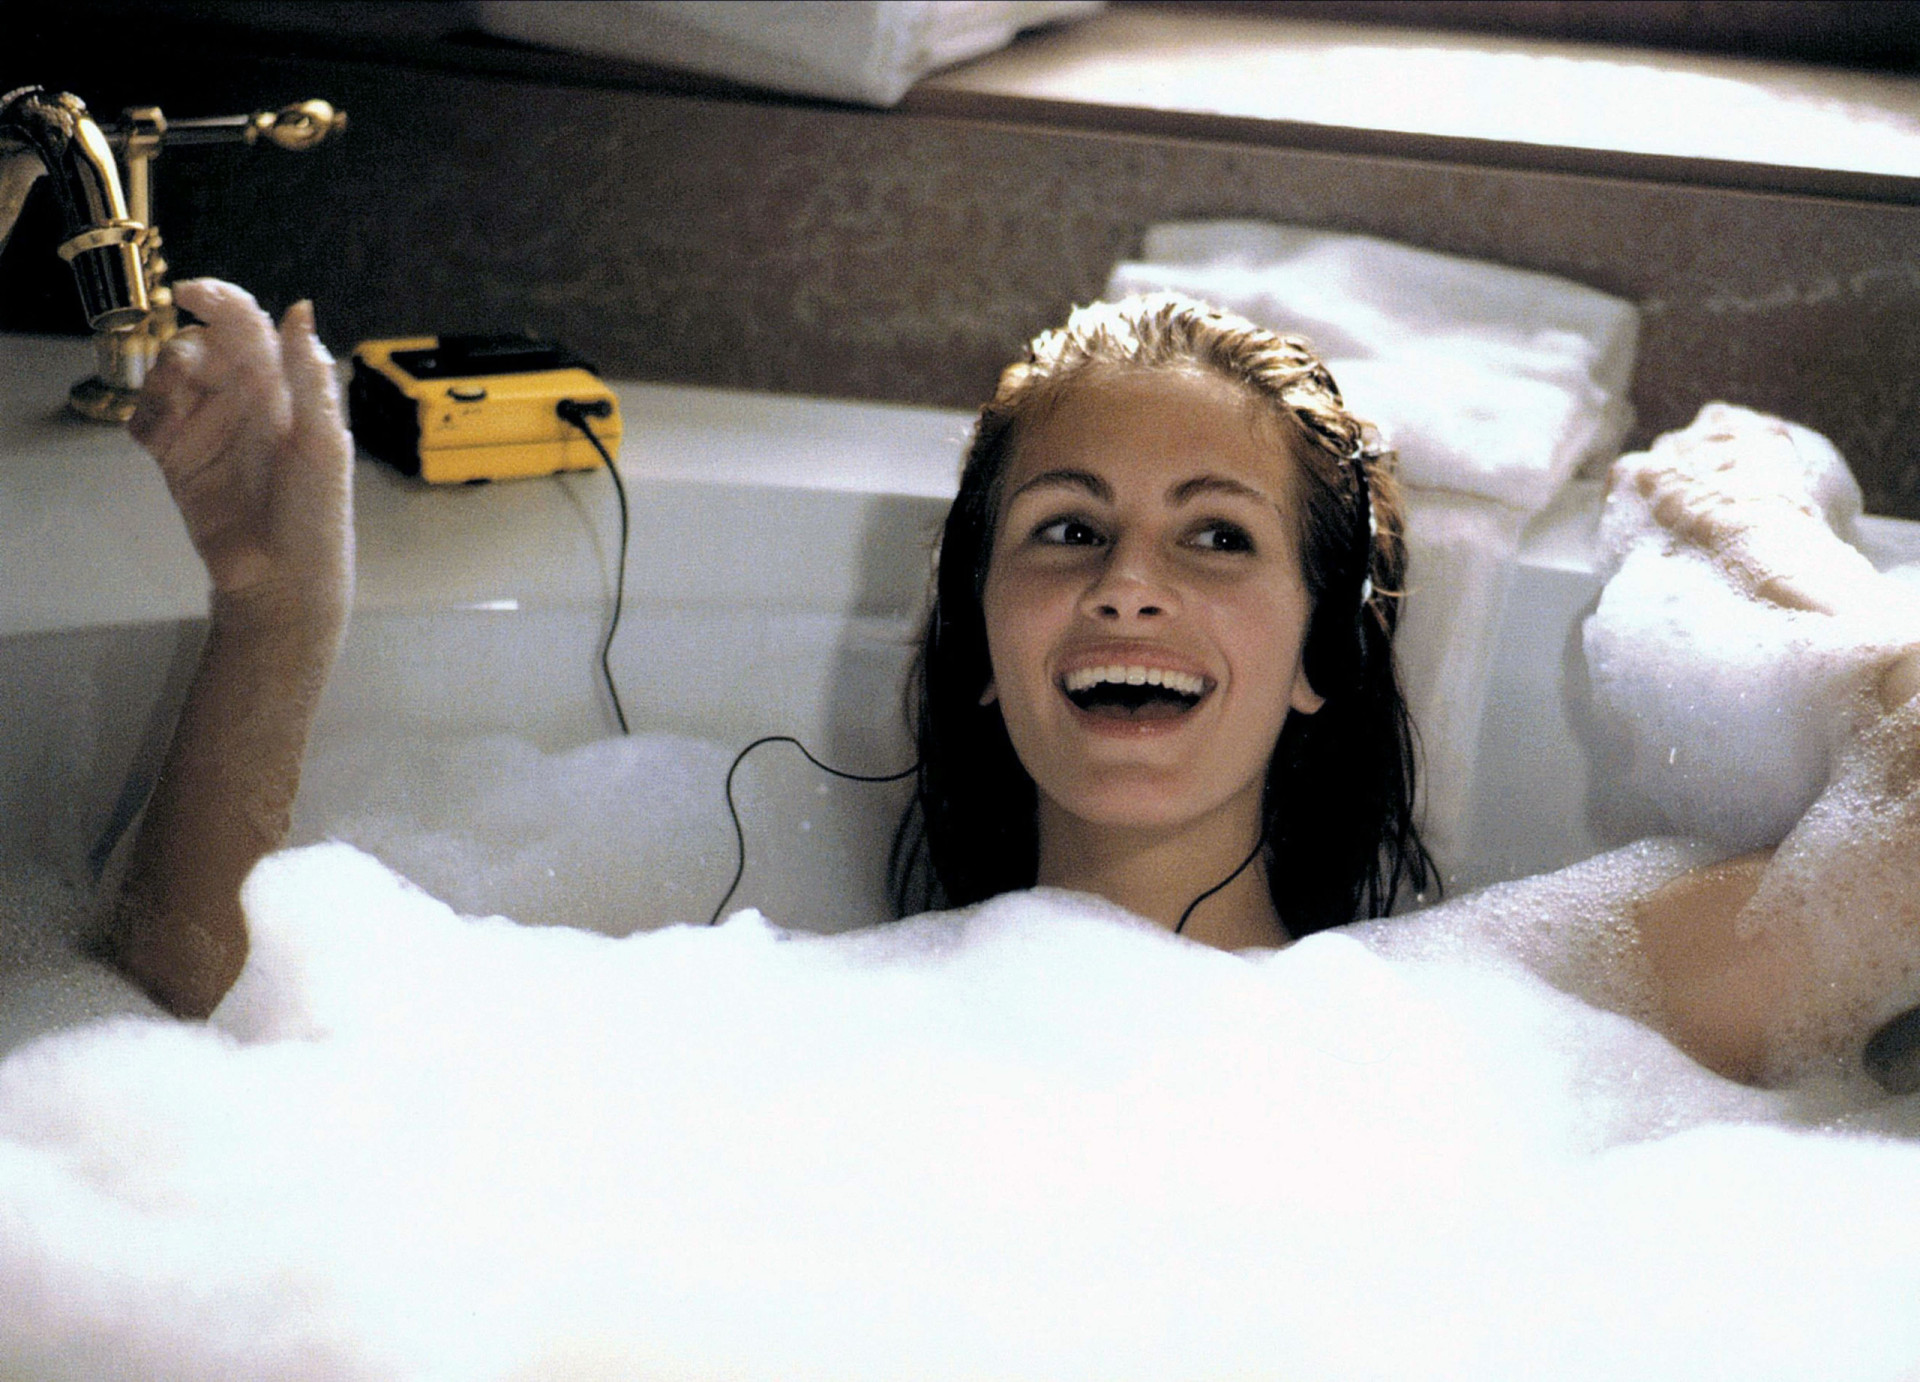 <p>A celebrated 'Pretty Woman' set piece, Julia Roberts' rendition in the bath of a Prince song during which she slides down and submerges her head under the bubbles is often cited as Hollywood's favorite bathtub moment.</p><p><a href="https://www.msn.com/en-us/community/channel/vid-7xx8mnucu55yw63we9va2gwr7uihbxwc68fxqp25x6tg4ftibpra?cvid=94631541bc0f4f89bfd59158d696ad7e">Follow us and access great exclusive content every day</a></p>